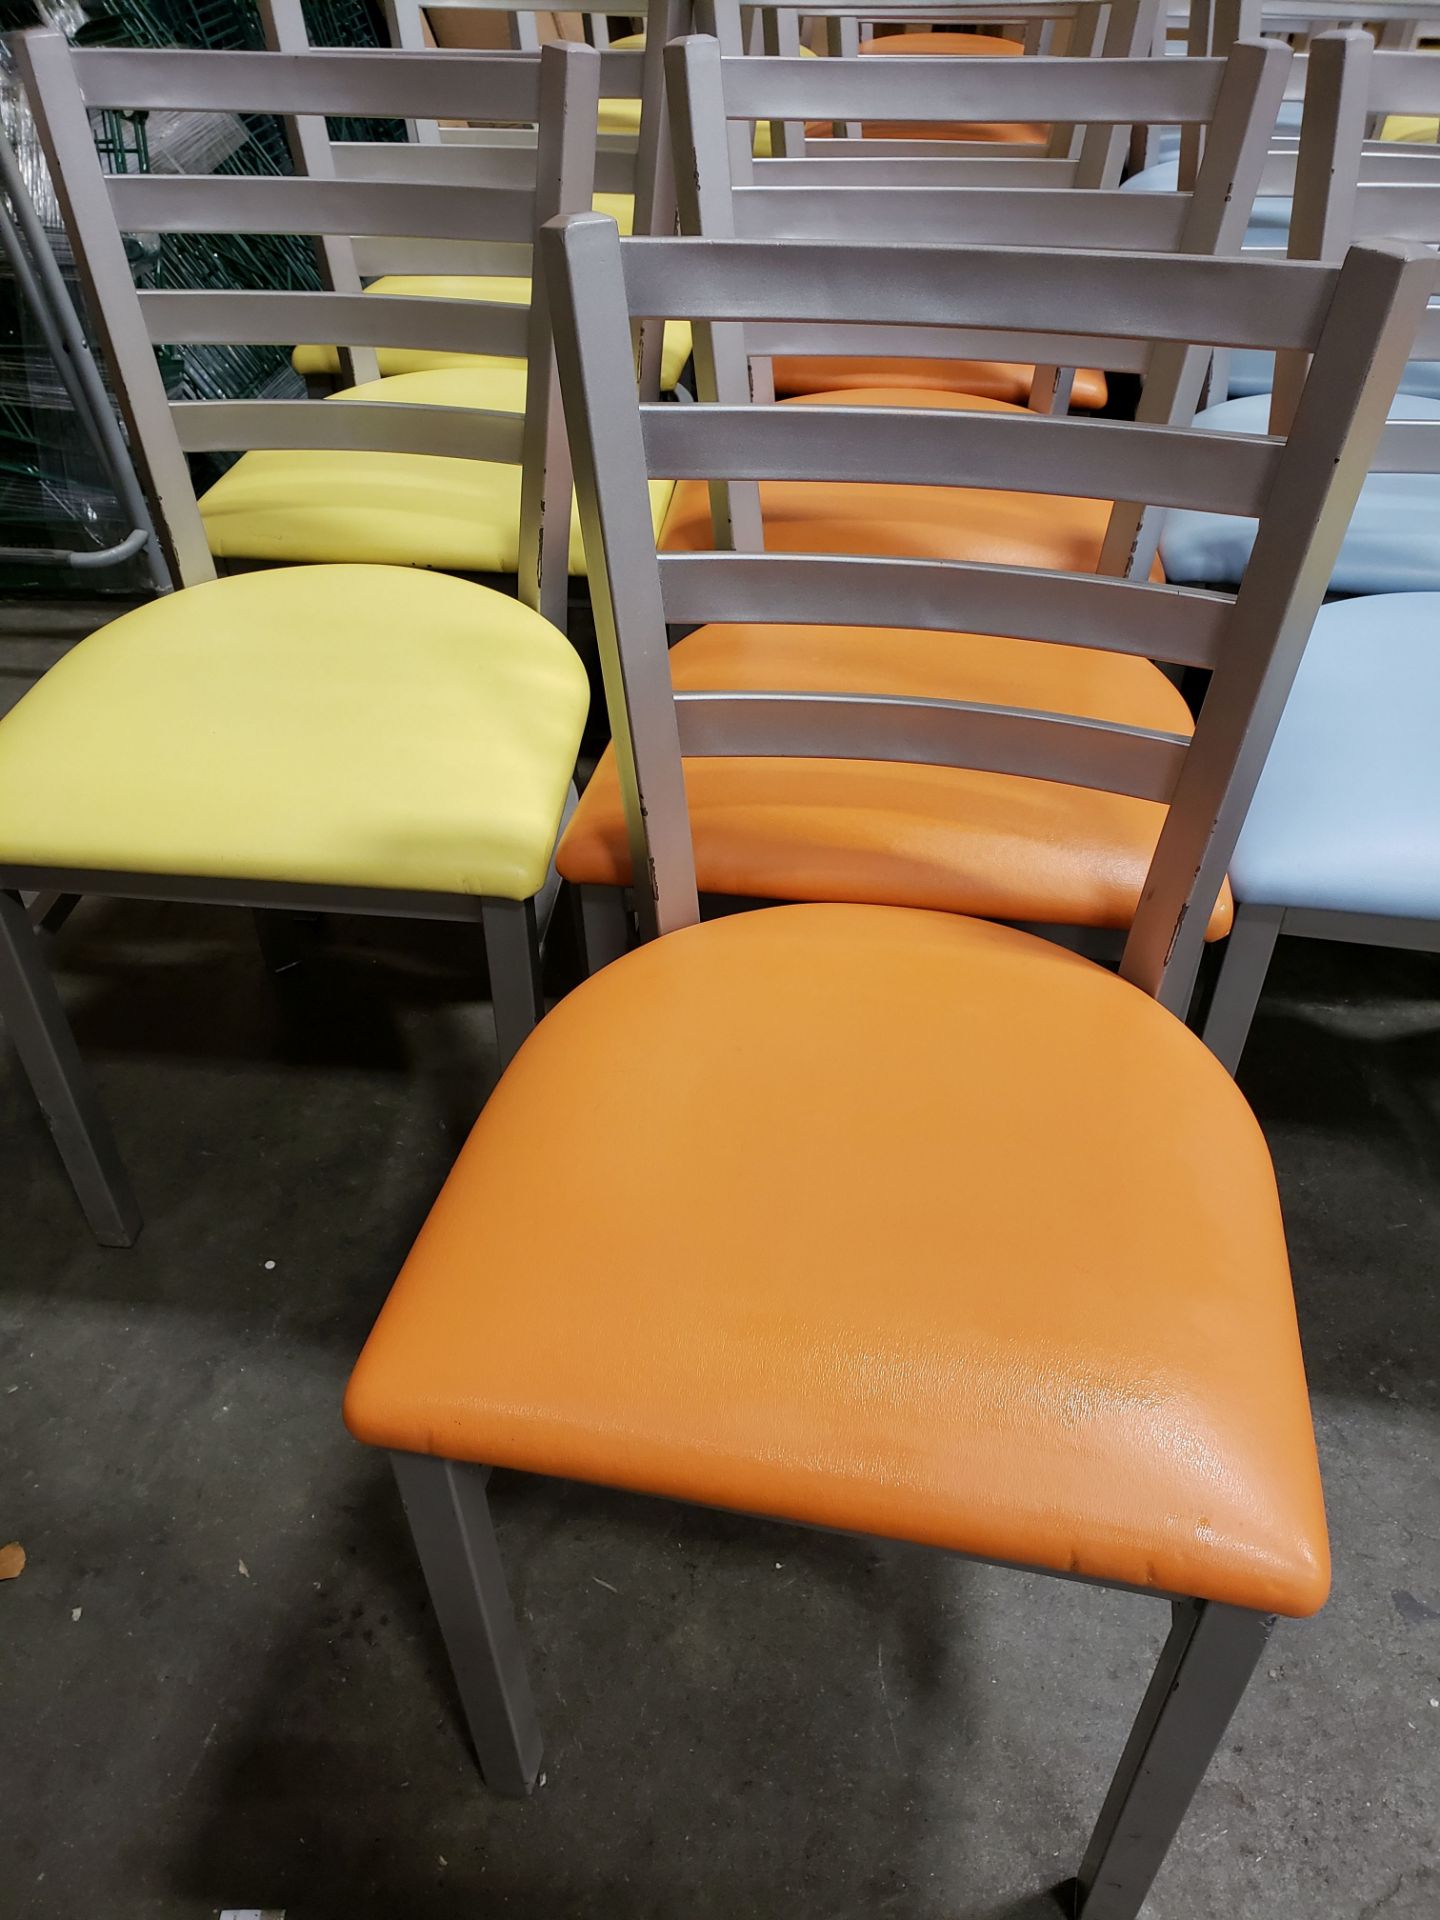 Metal Frame Chairs with Padded Seats - Lot of 37 - Image 2 of 5